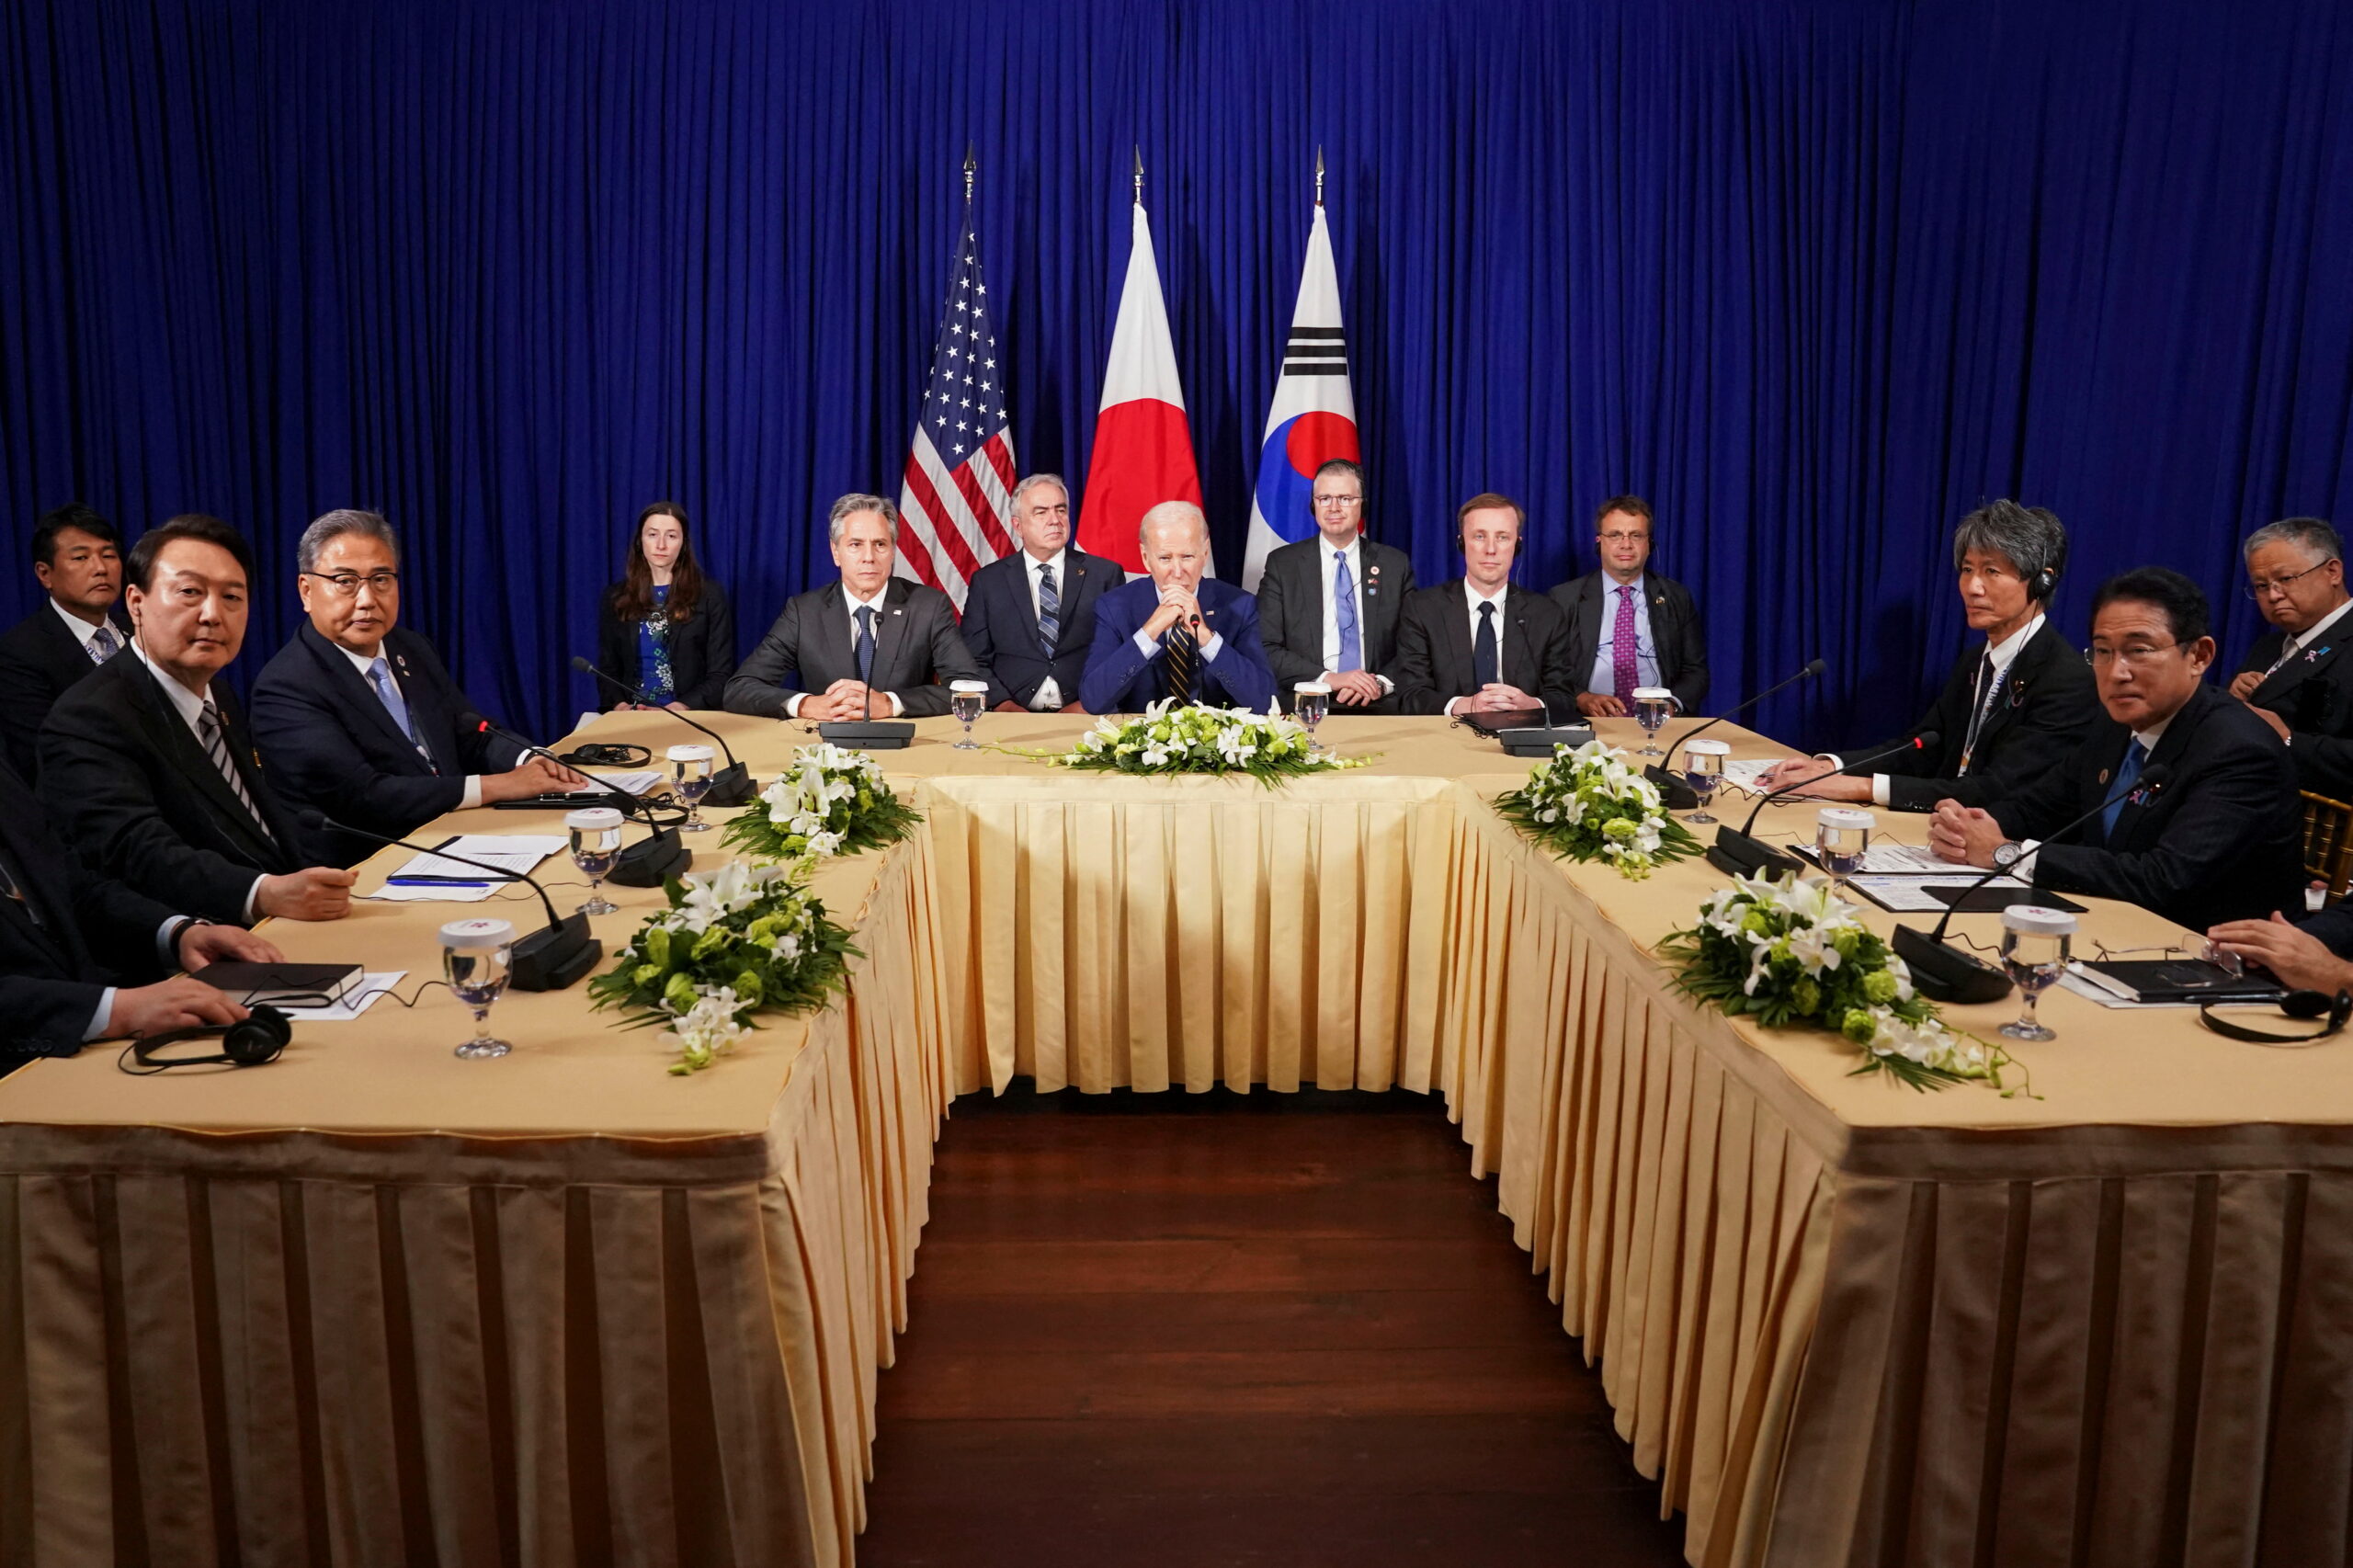 United States President Joe Biden holds a trilateral meeting with Japanese Prime Minister Fumio Kishida and South Korean President Yoon Suk-yeol in Phnom Penh, Cambodia, 13 November 2022. (Photo: Reuters/Kevin Lamarque)